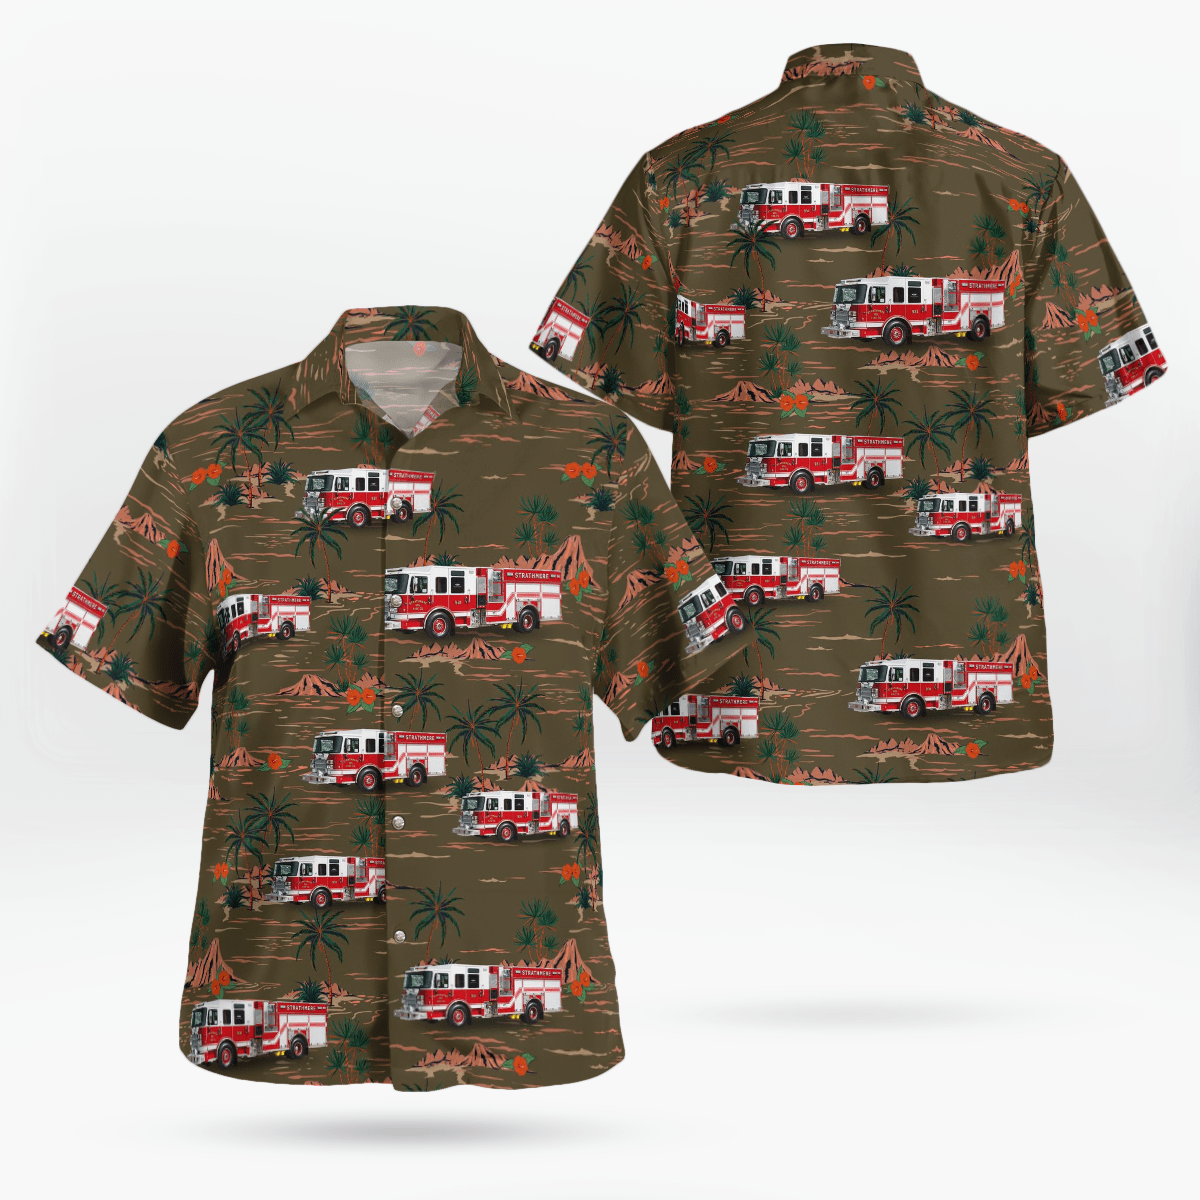 Strathmere, New Jersey, Strathmere Volunteer Fire Company Hawaiian Shirt DLHH0305PD10